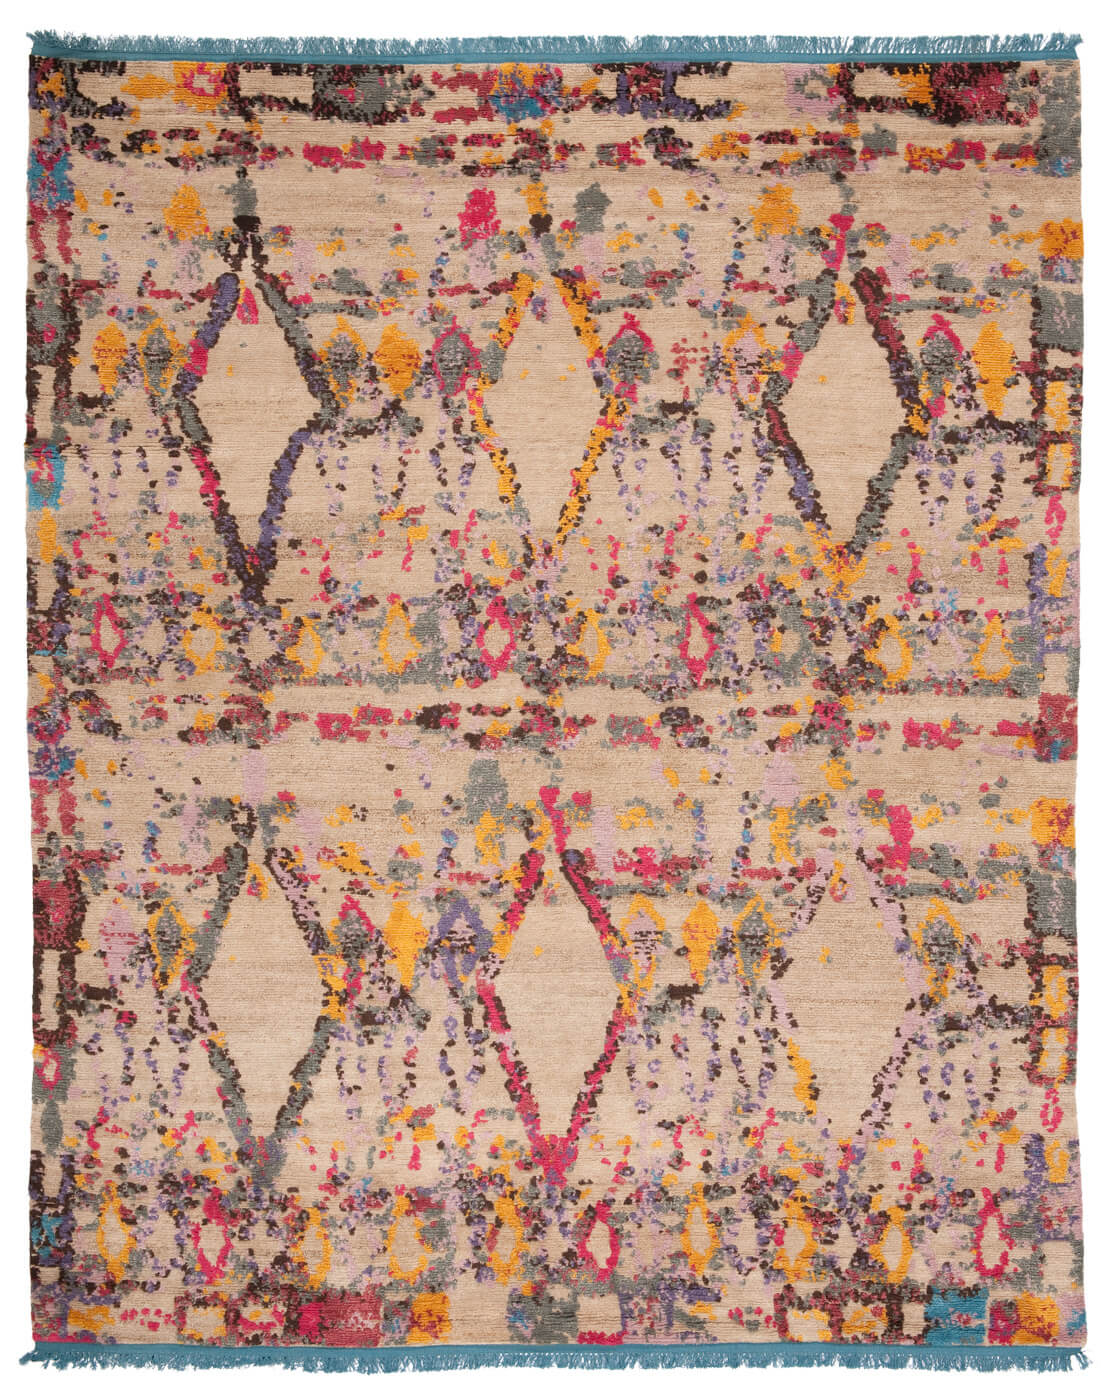 Hand-Woven Multicolored Luxurious Rug